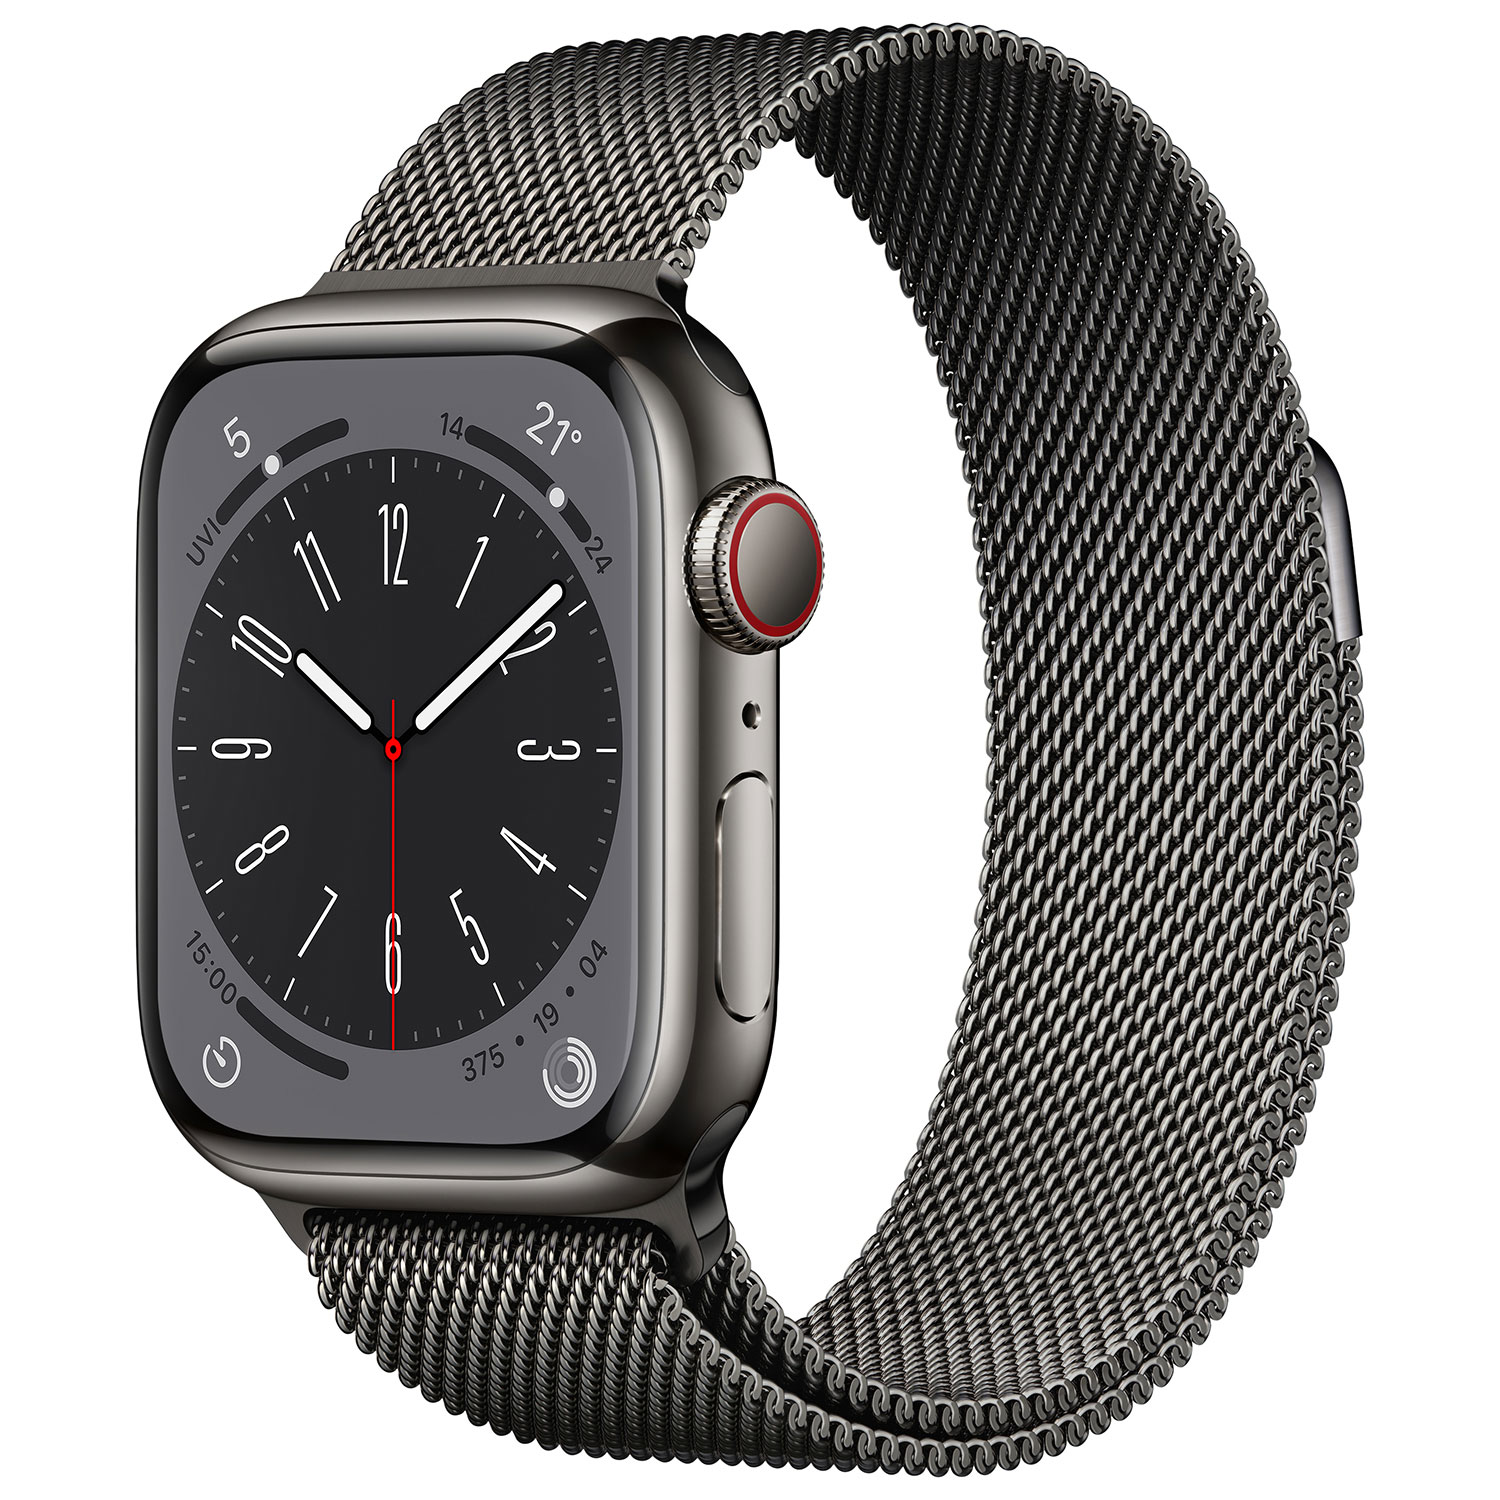 Rogers Apple Watch Series 8 (GPS + Cellular) 41mm Graphite Stainless Steel Case with Graphite Milanese Loop - S/M - Monthly Financing